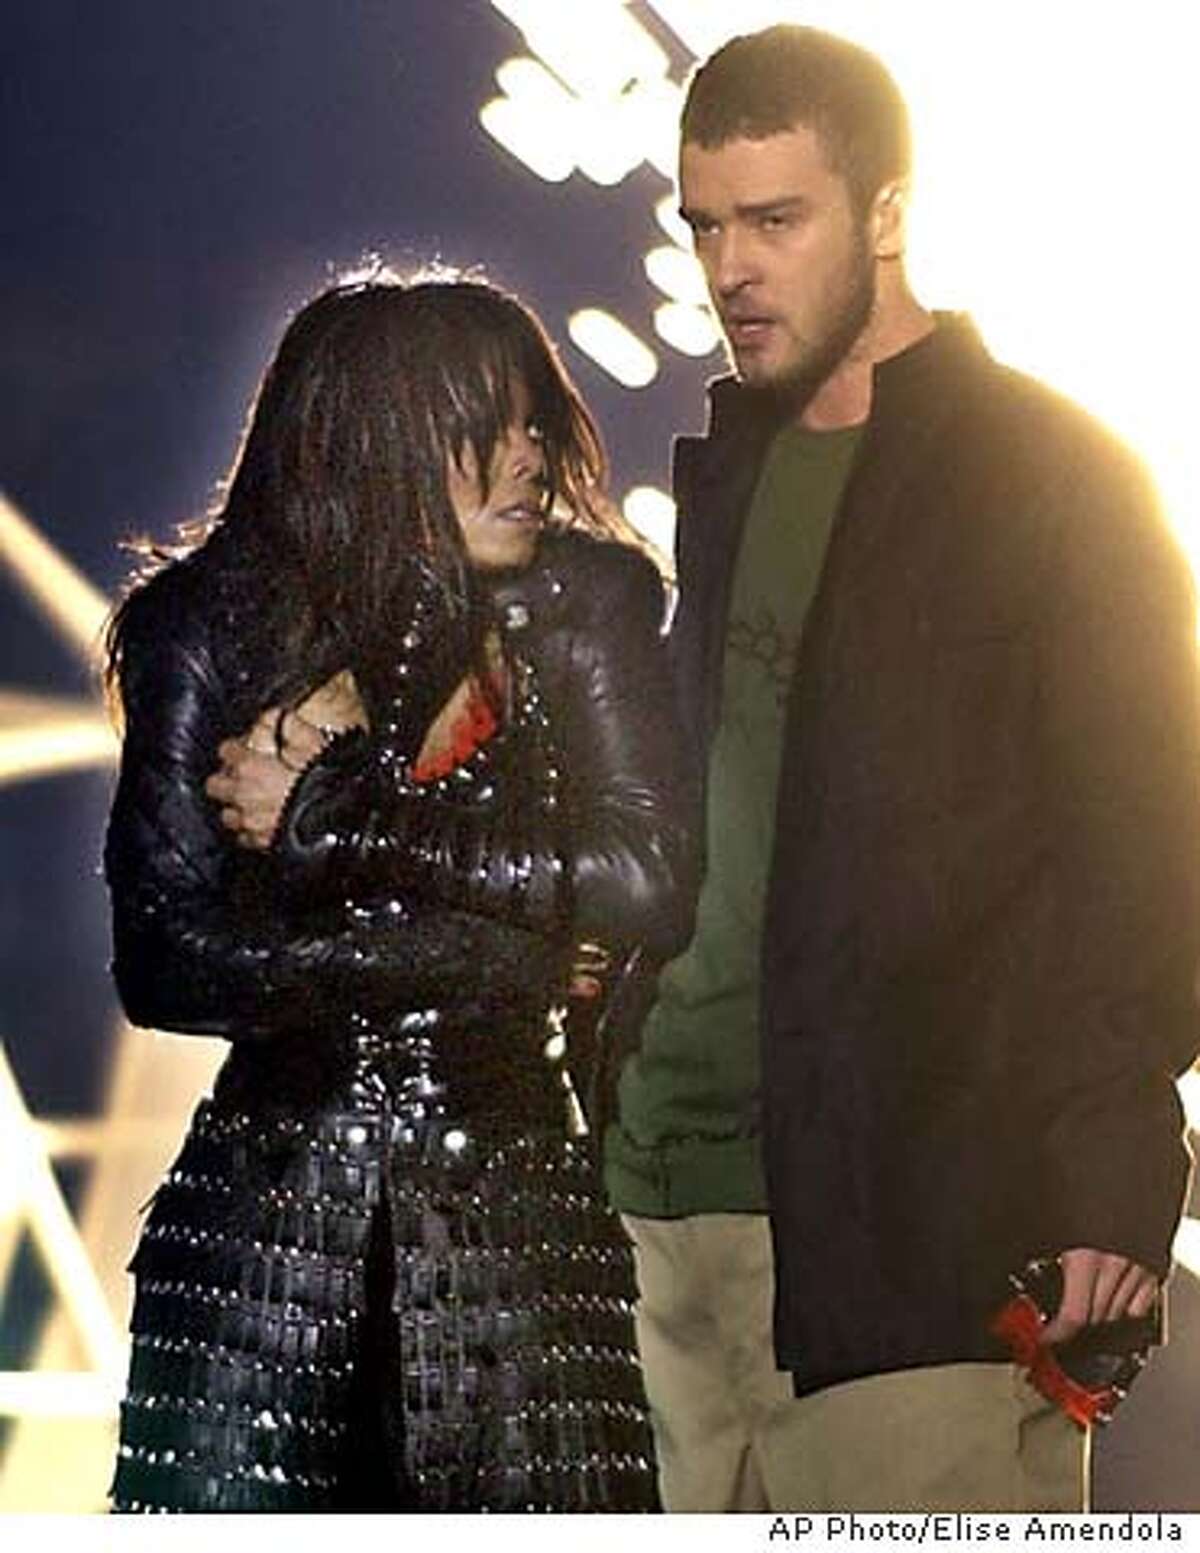 Singer Janet Jackson, left, covers her breast after her outfit came undone during a number with Justin Timberlake during the halftime show of Super Bowl XXXVIII in Houston, Sunday, Feb. 1, 2004. (AP Photo/Elise Amendola) ALSO RAN: 2/3/2004 Undone: Janet Jackson and Justin Timberlake are apologizing for what they insist was an accidental exposure of her breast during the halftime show.